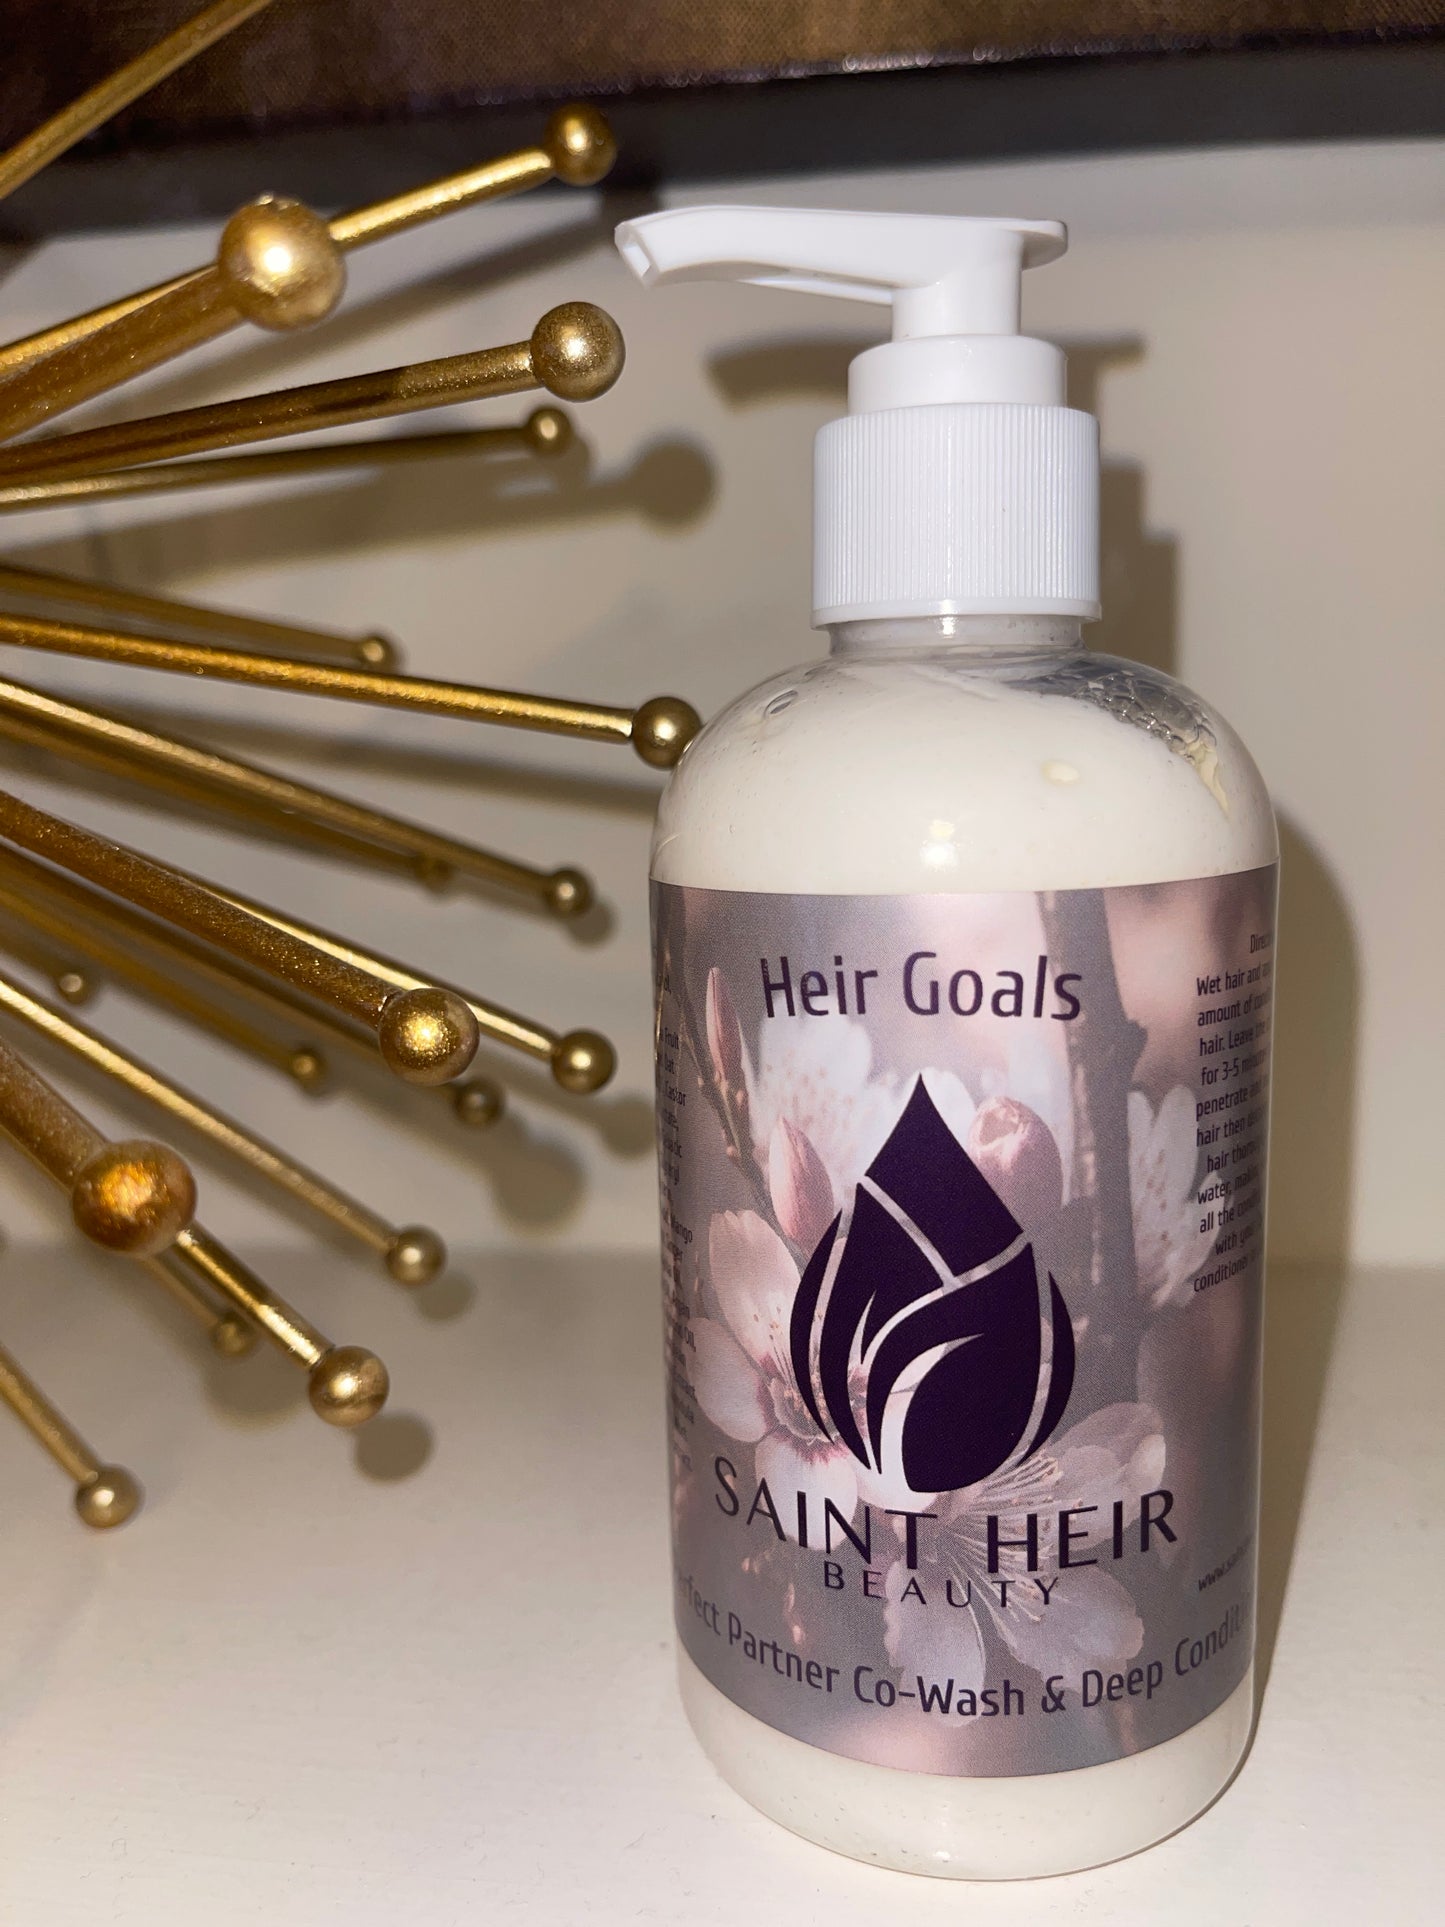 The Perfect Partner Co-Wash & Deep Conditioner